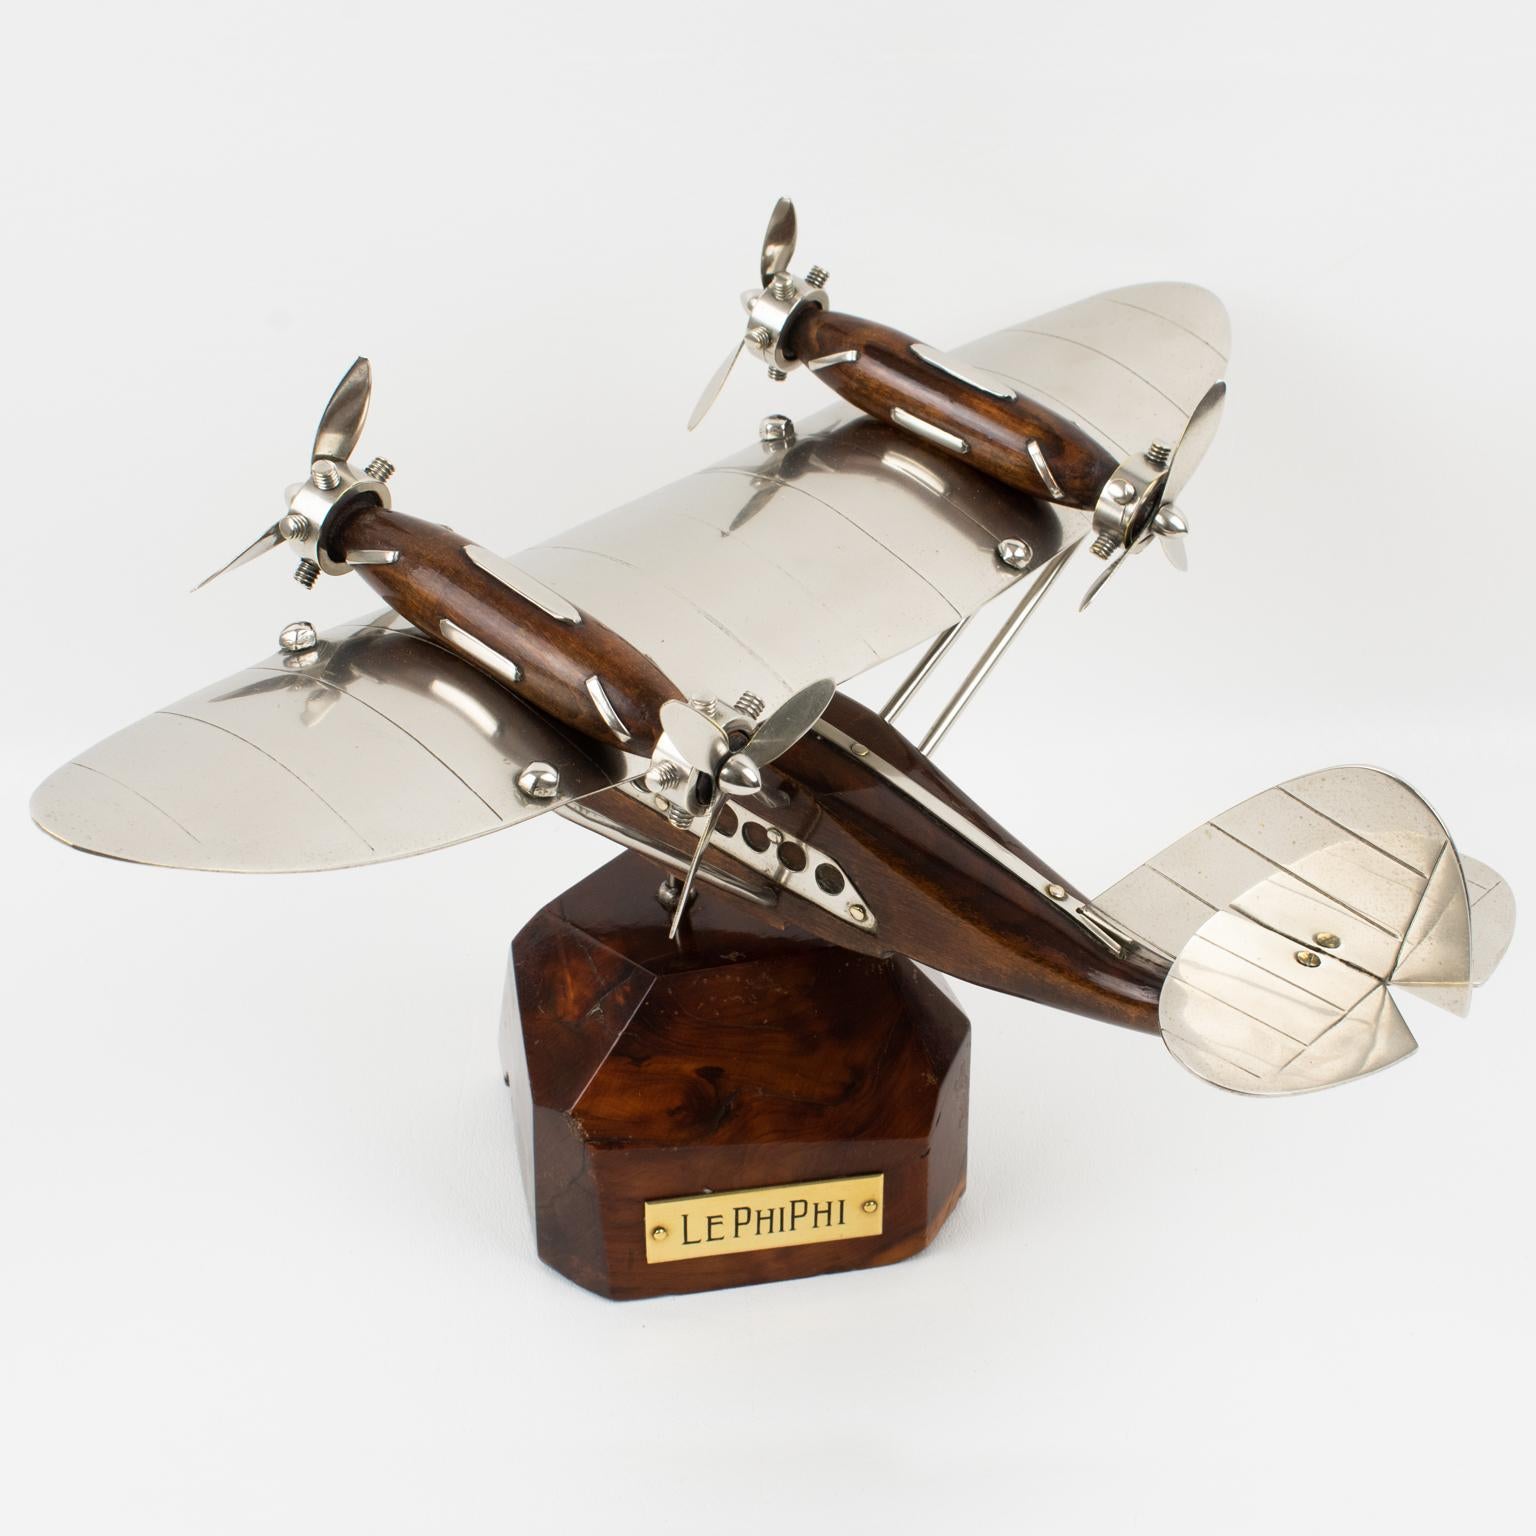 Art Deco Wood and Chrome Airplane SeaPlane Aviation Model, France 1940s For Sale 2